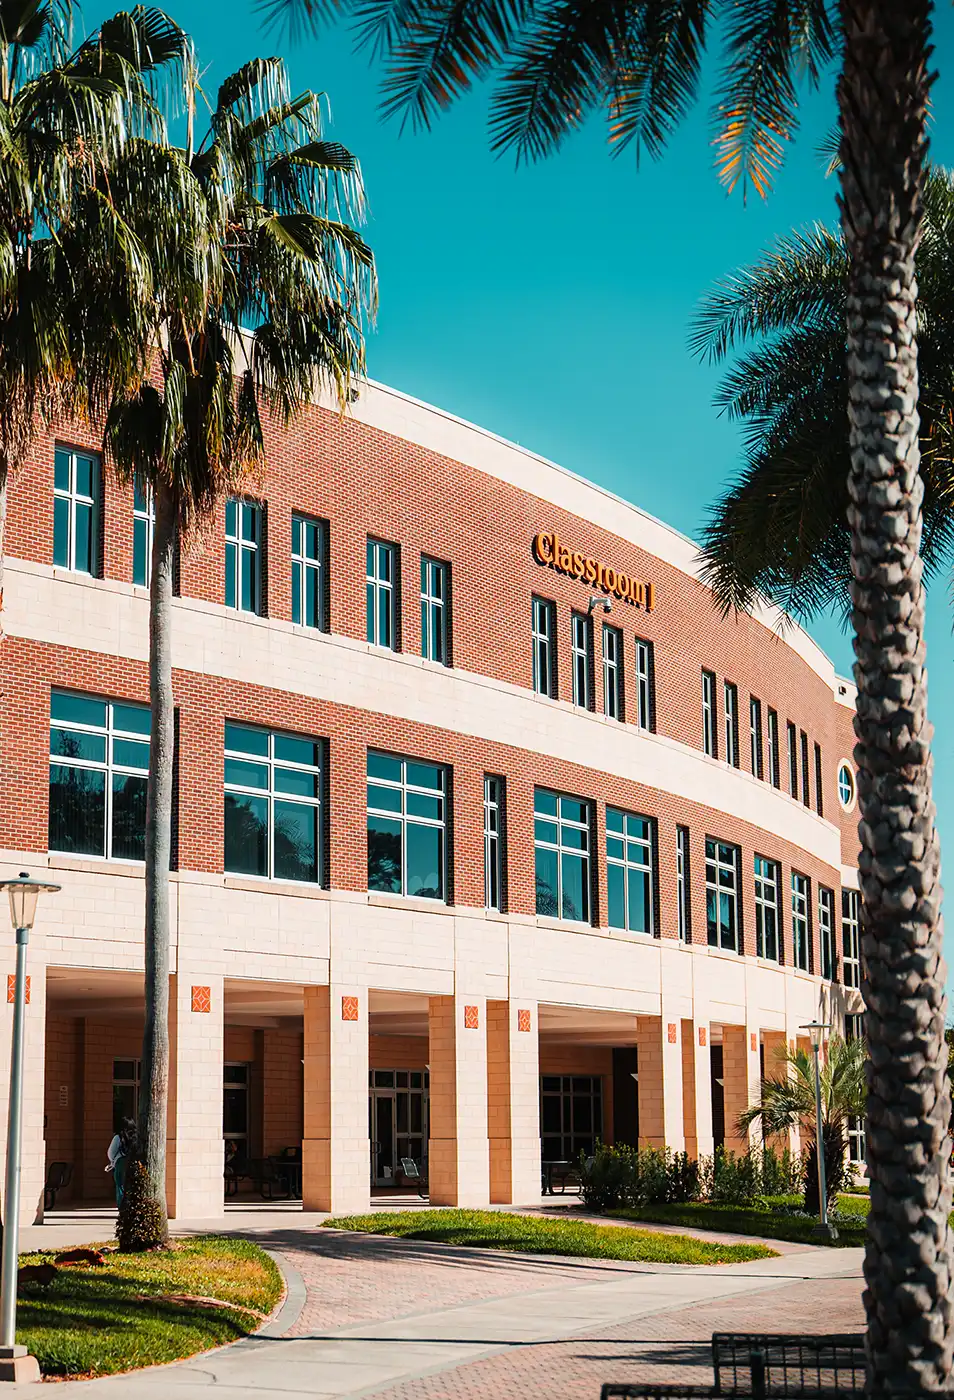 An exterior view of a classroom building on the UCF campus